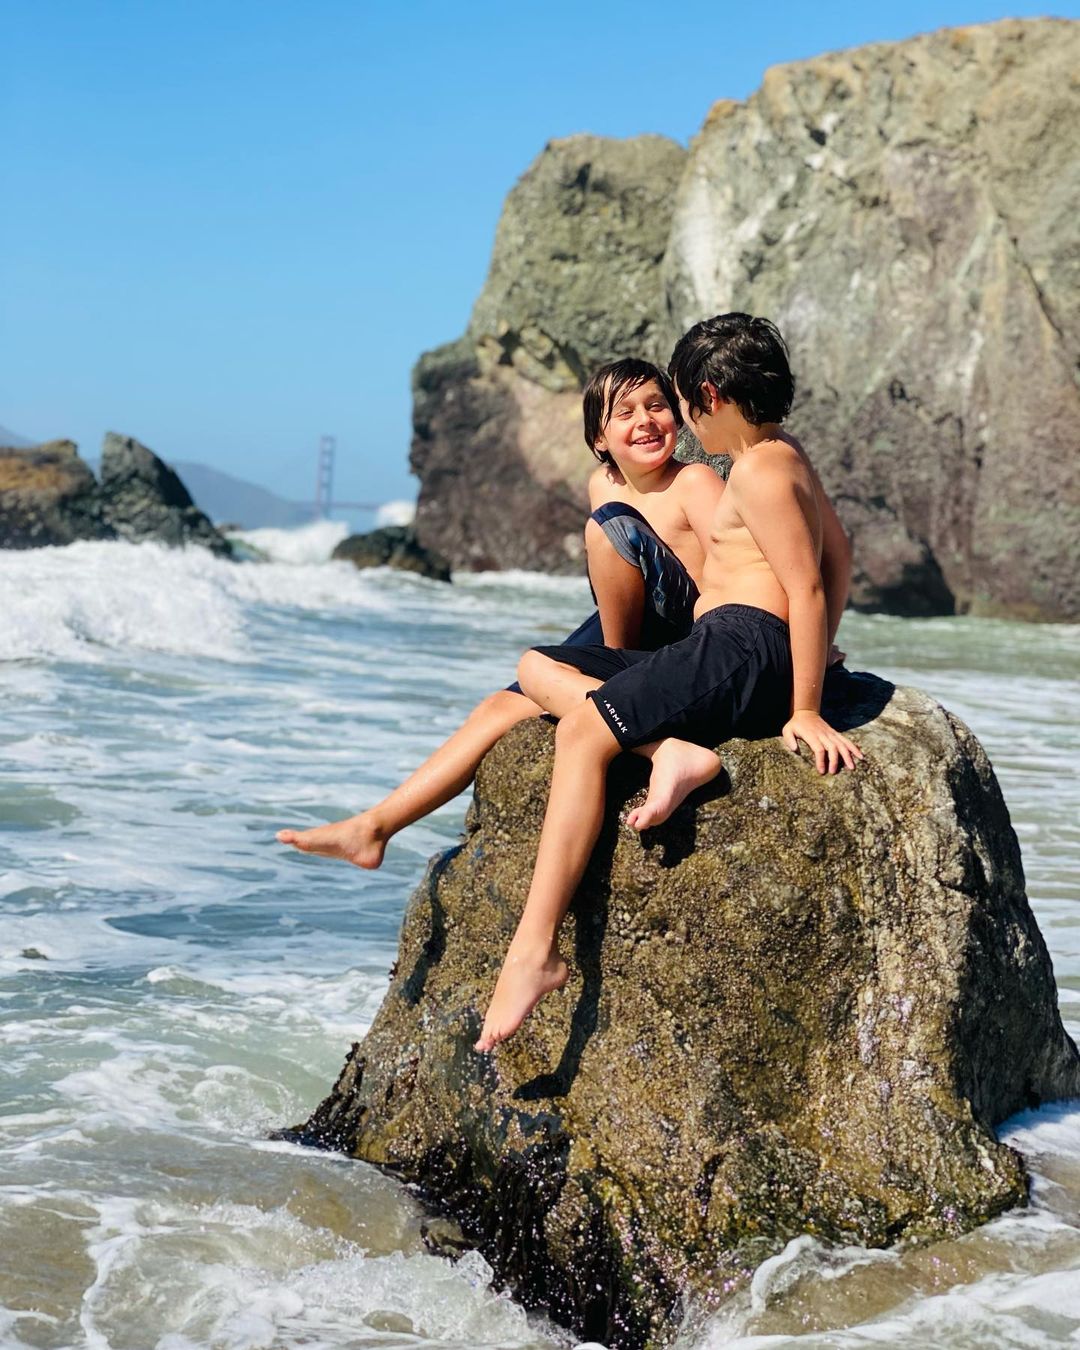 Two kids sitting on a rock on a San Francisco beach. Photo by Instagram user @valentinaorantes